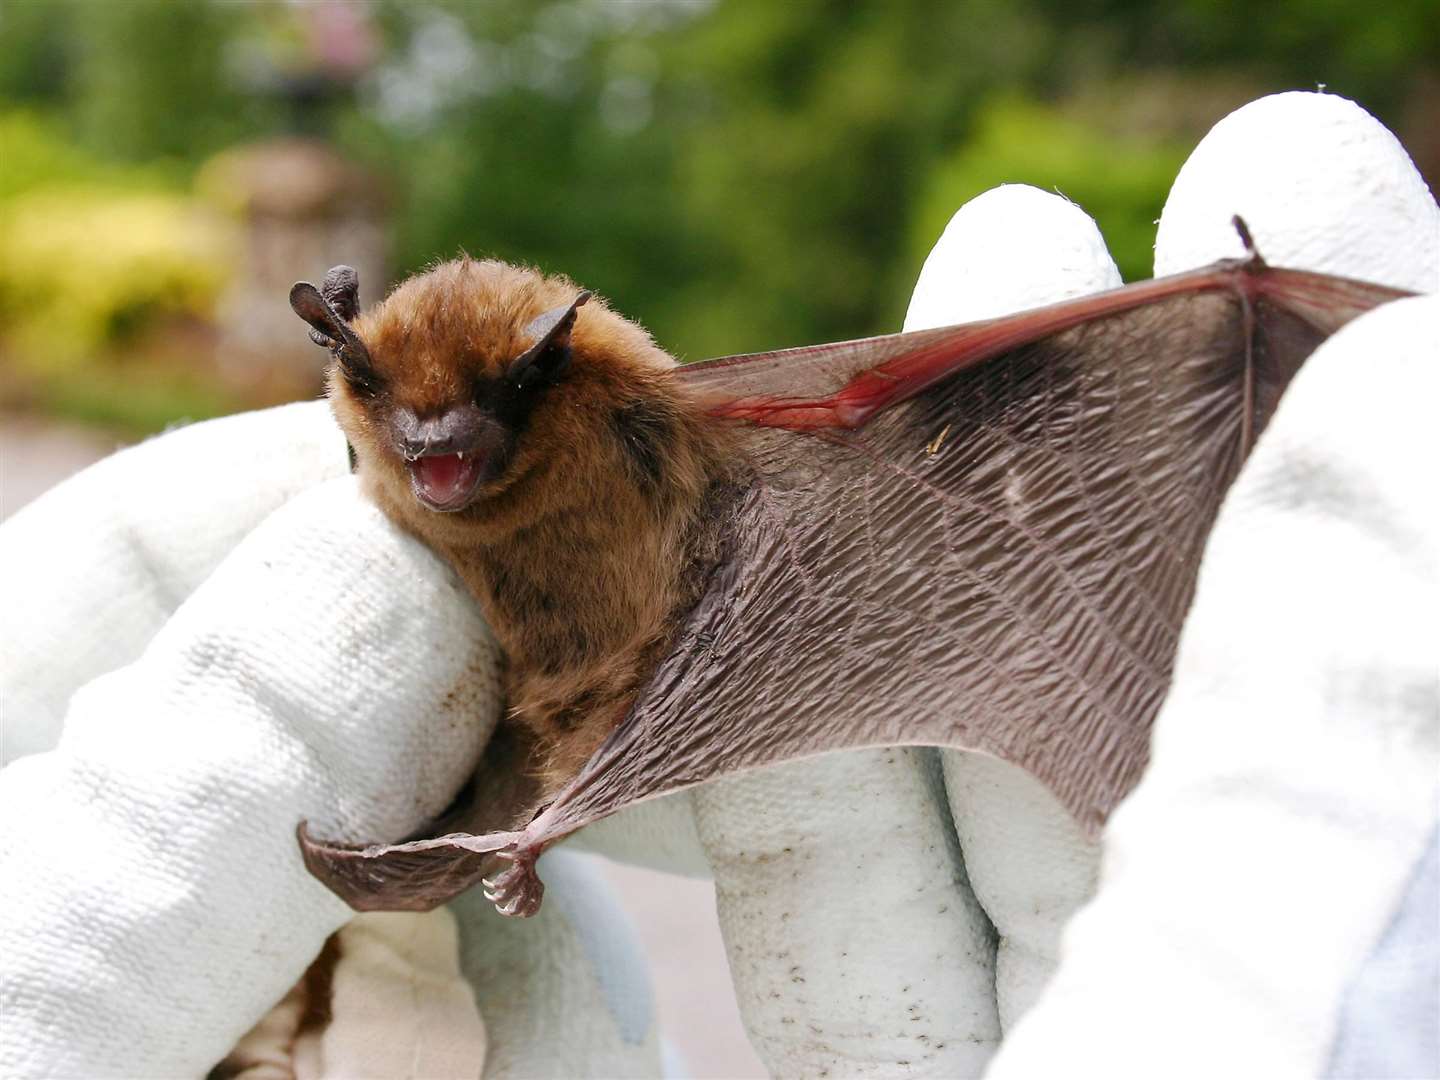 A pipistrelle bat, one of the most common species in the UK, has a wingspan of around 20cm (National Trust handout/PA)